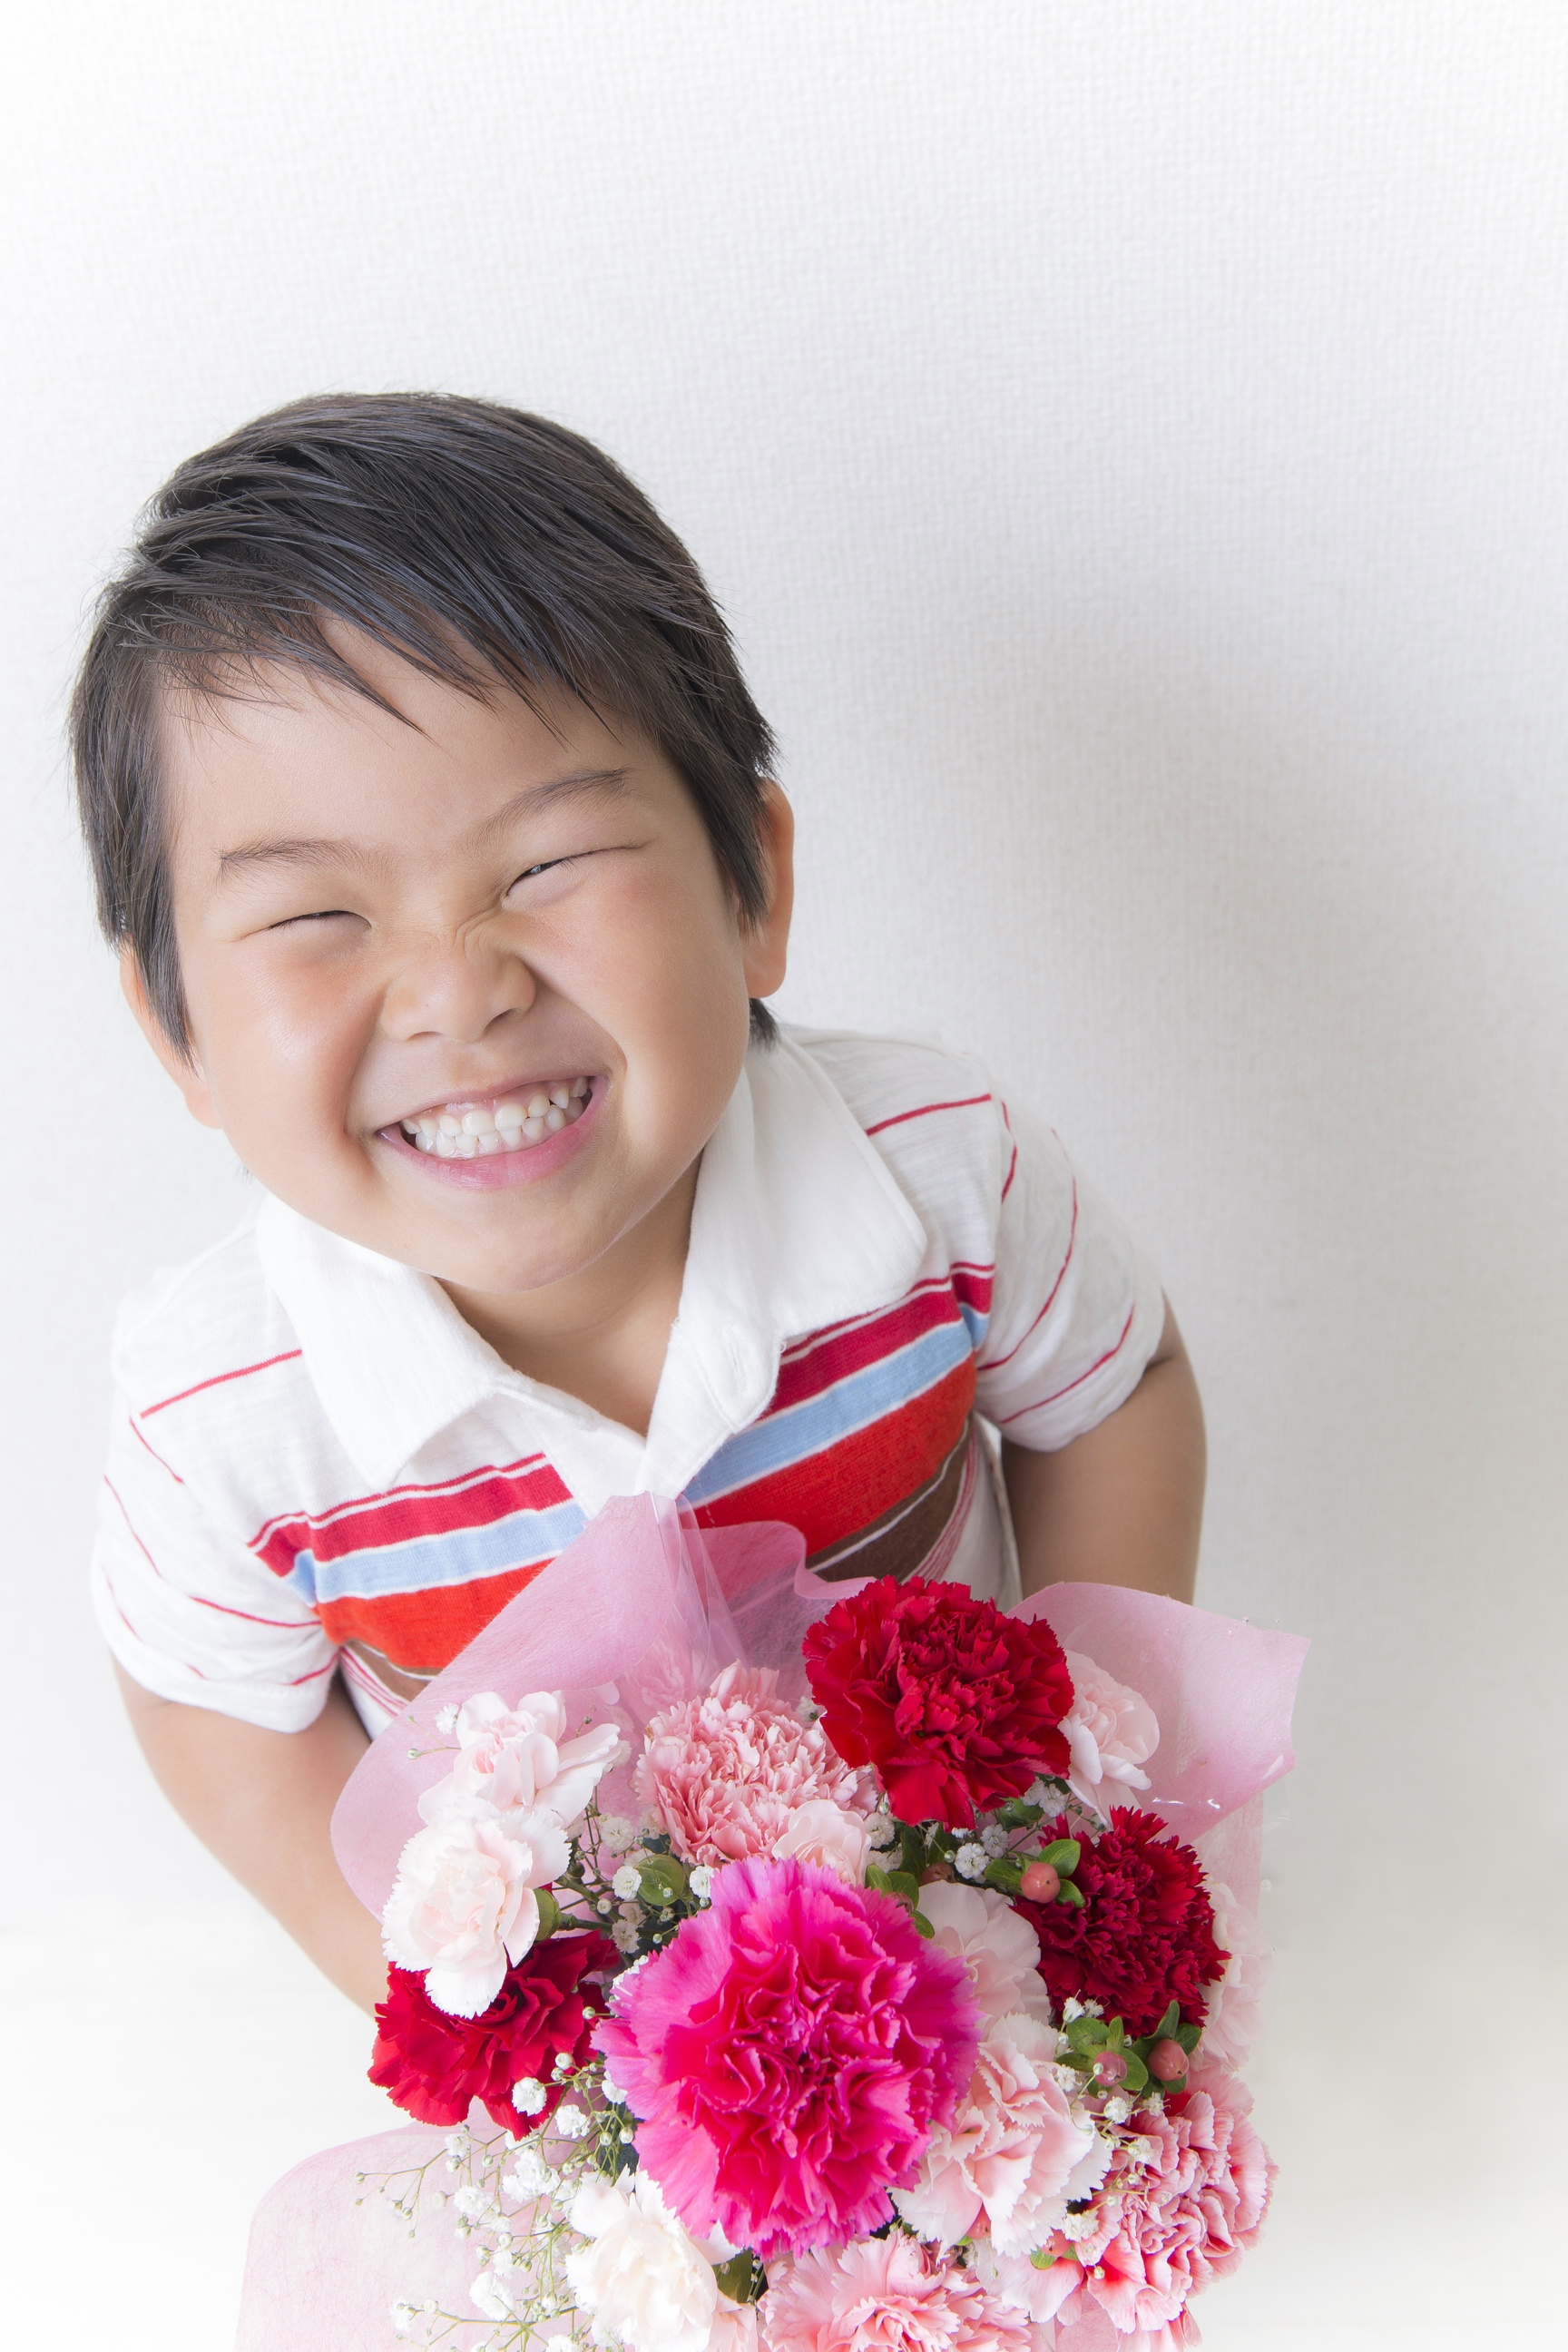 50 Mother’s Day Gift Ideas Kids Can Help Make